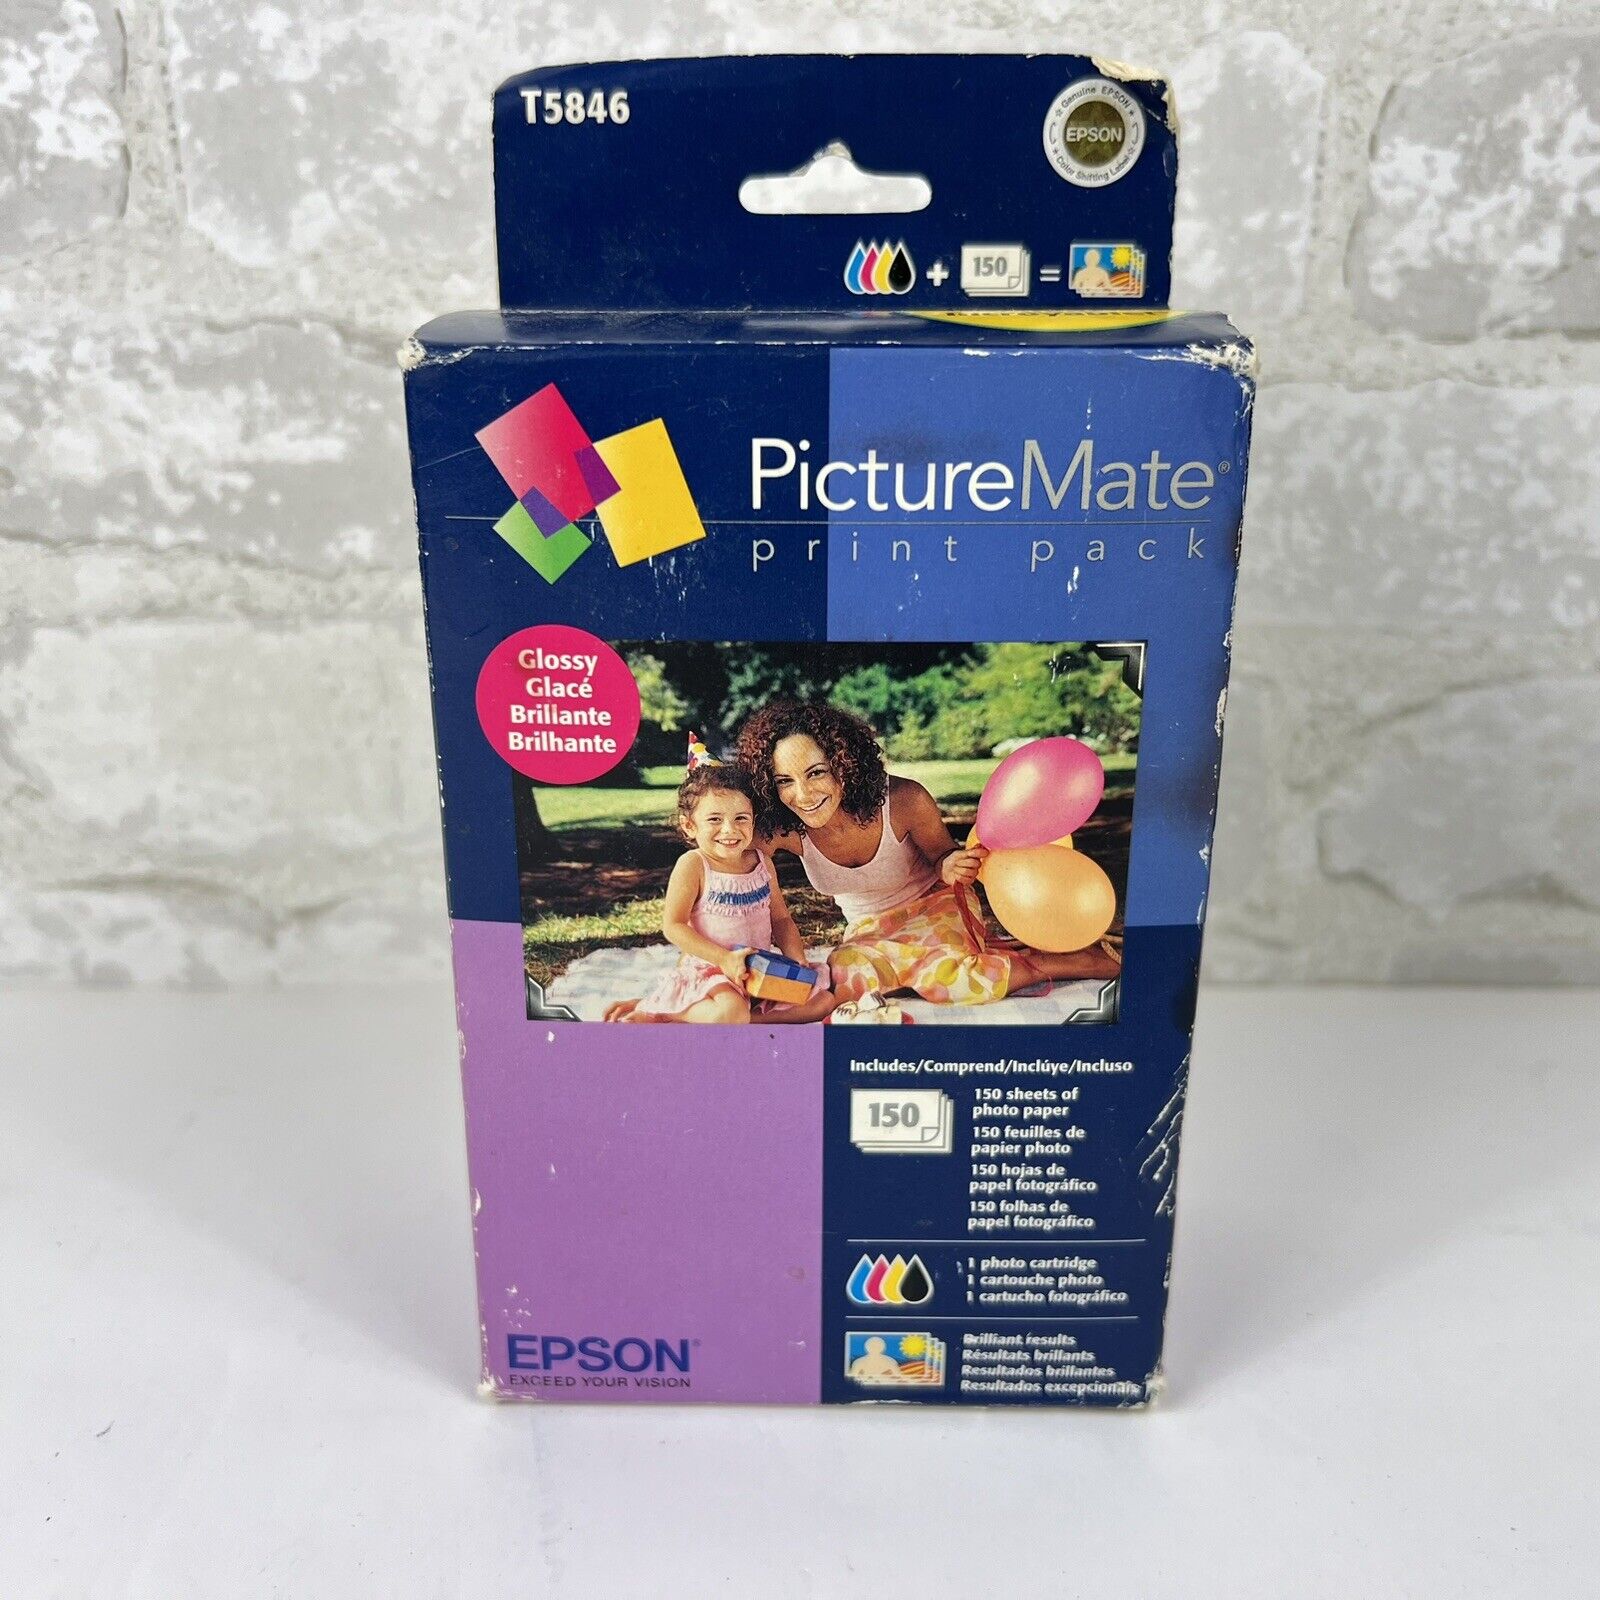 Epson T5846 PictureMate 200-Series Glossy Print Pack (Makes 150 4x6